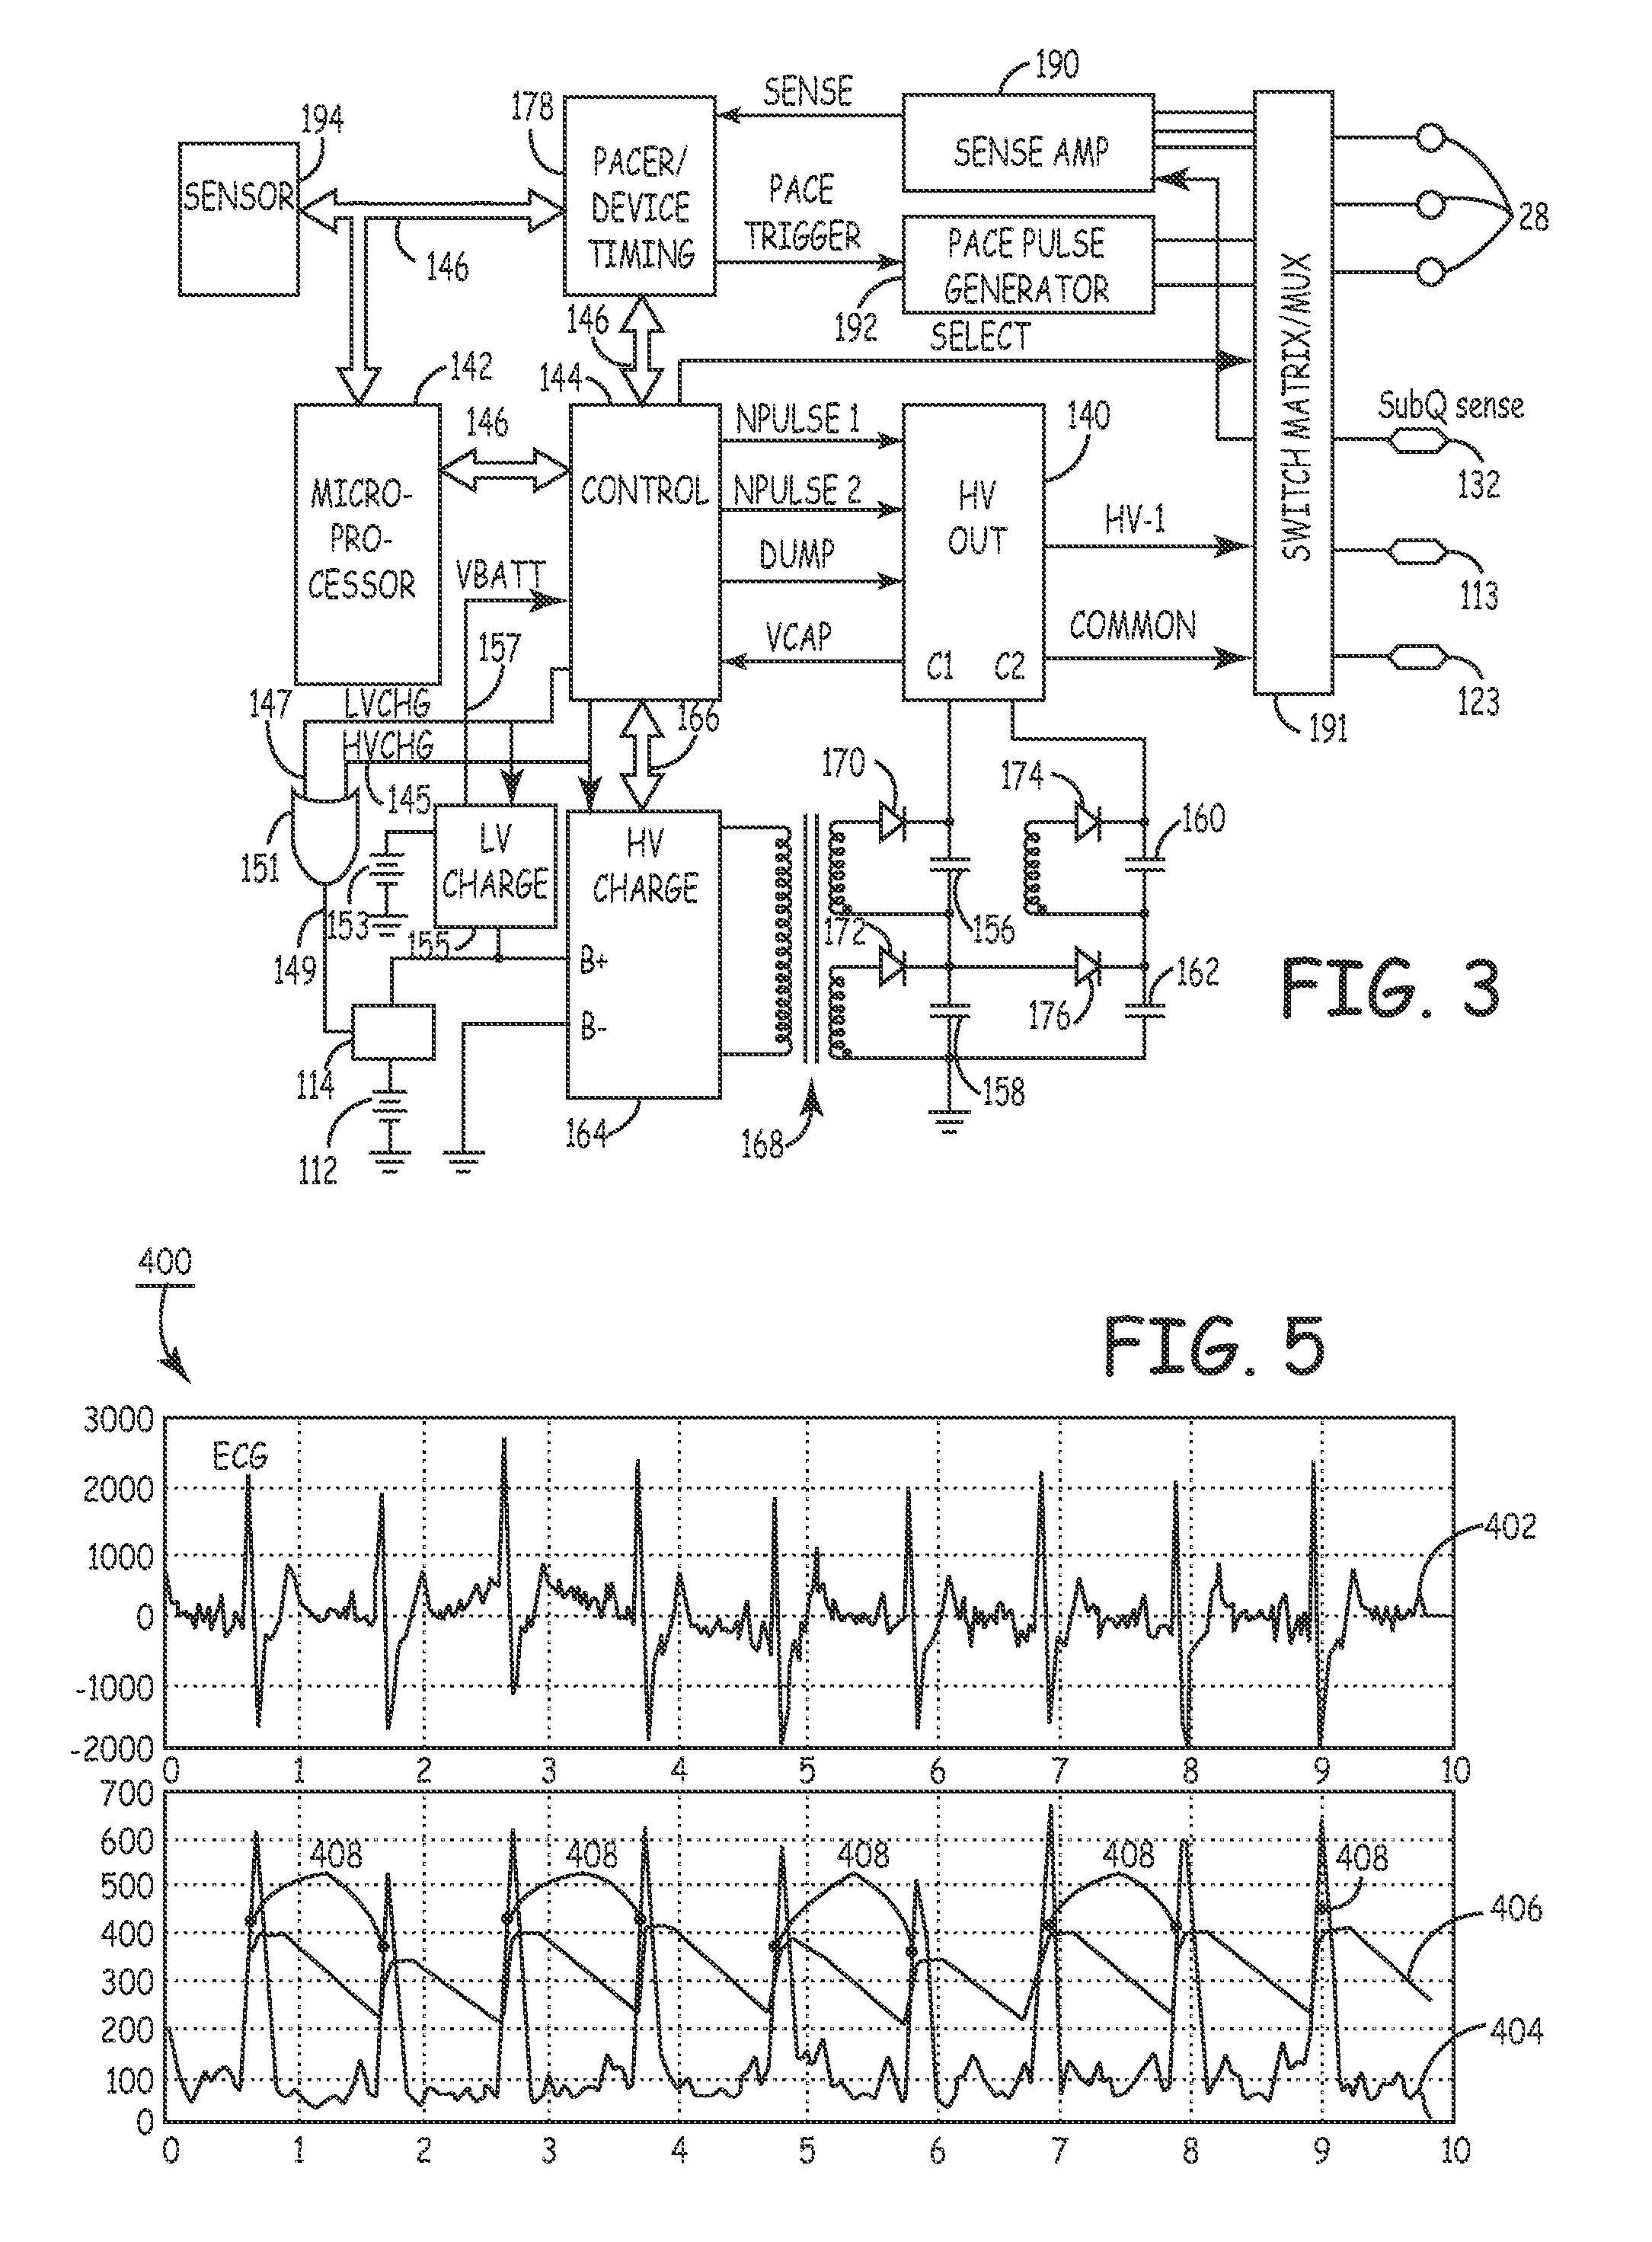 Method and apparatus for detecting arrhythmias in a medical device